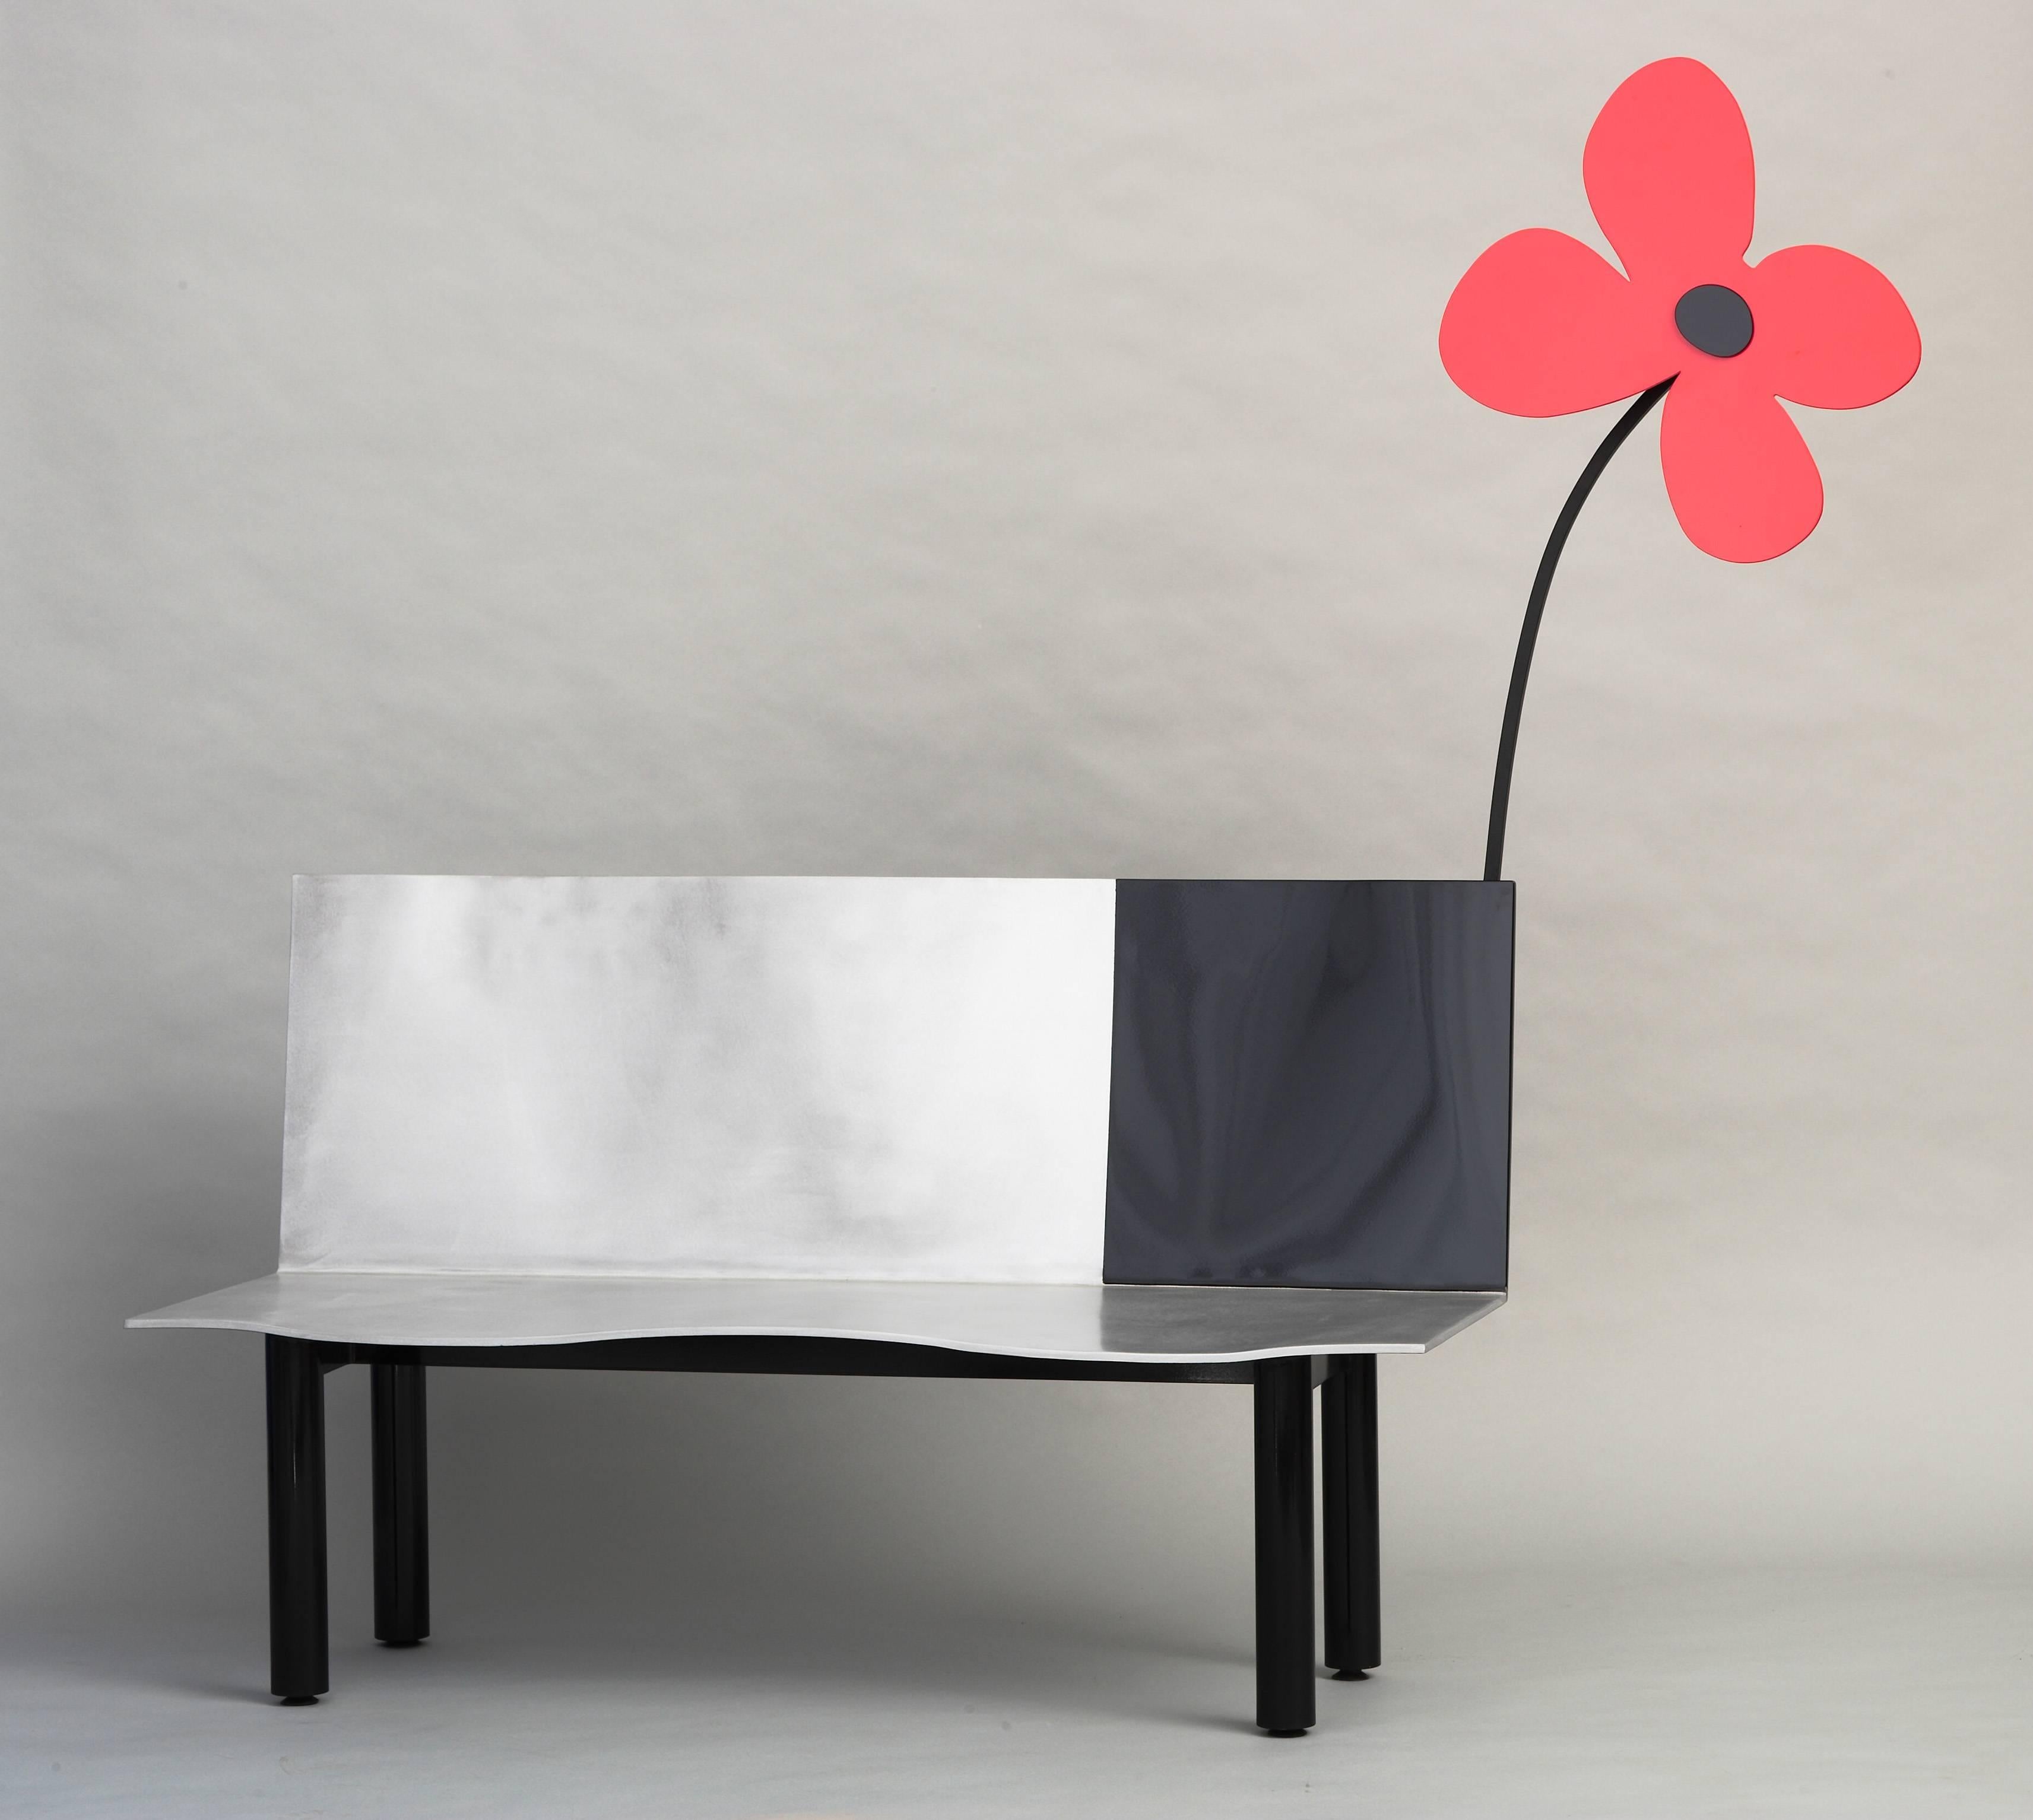 Aki Kuroda’s iconic red flower bench was created in 2007 for his solo exhibition, Cosmo city, at the Rabih Hage Gallery, London. The series of limited edition “sculpture-furniture” pieces formed part of Kuroda’s London iteration of his ongoing